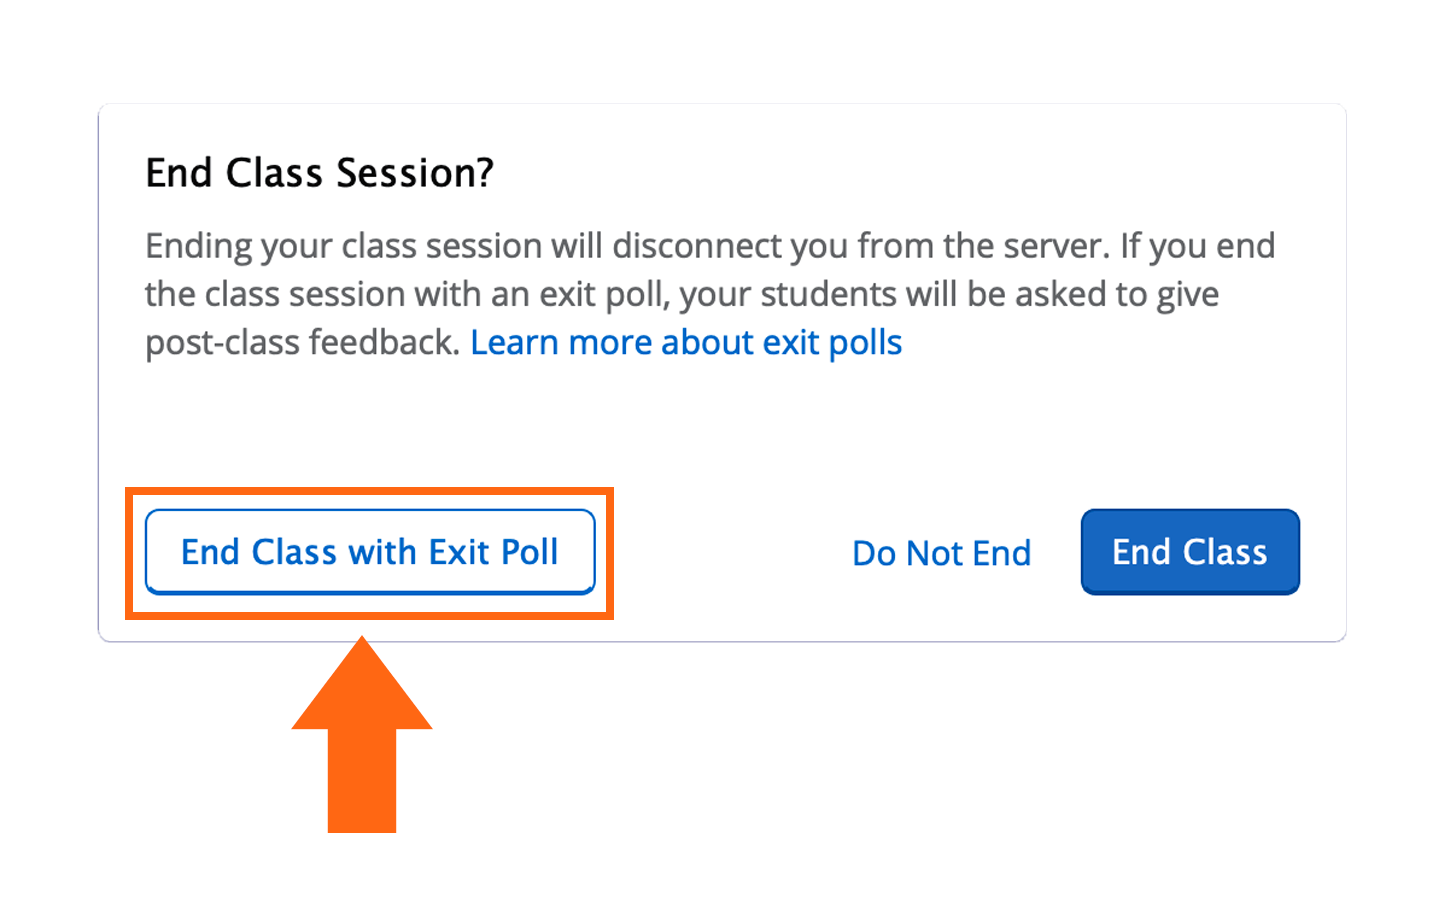 Ending the class with an exit poll